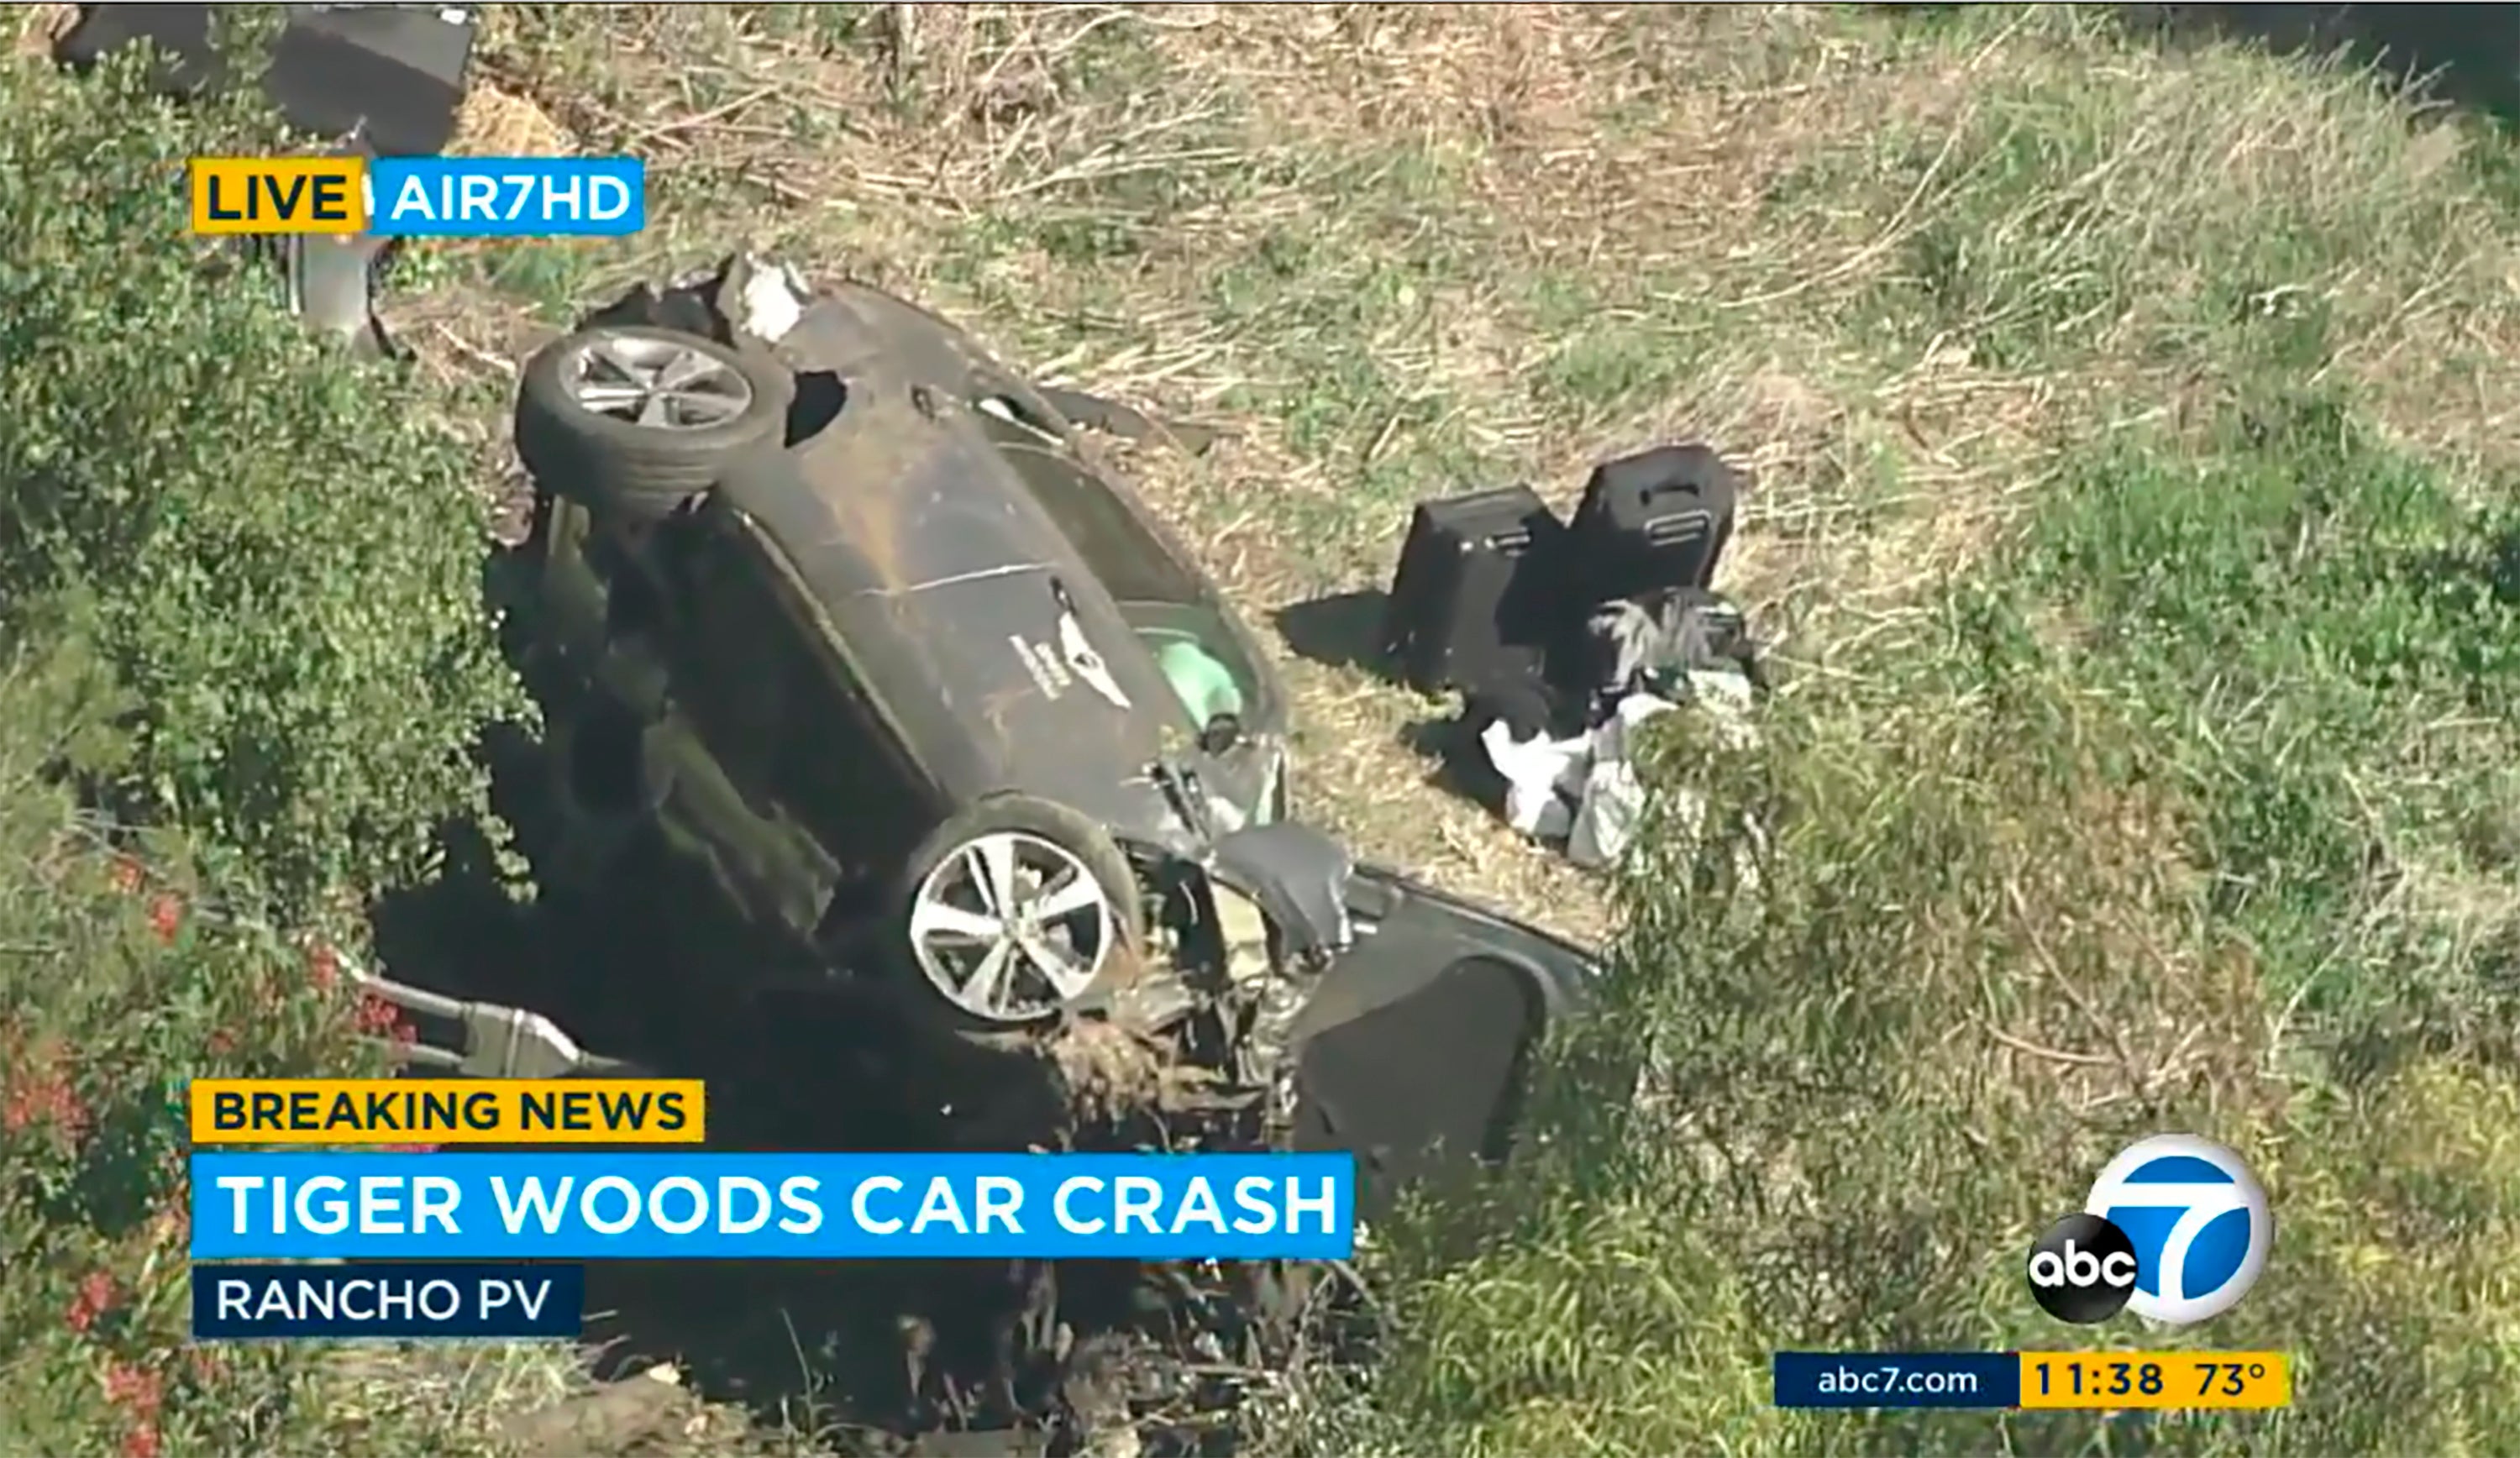 Tiger Woods Golfer Fortunate To Survive After Genesis Suv Crash Police Say The Independent